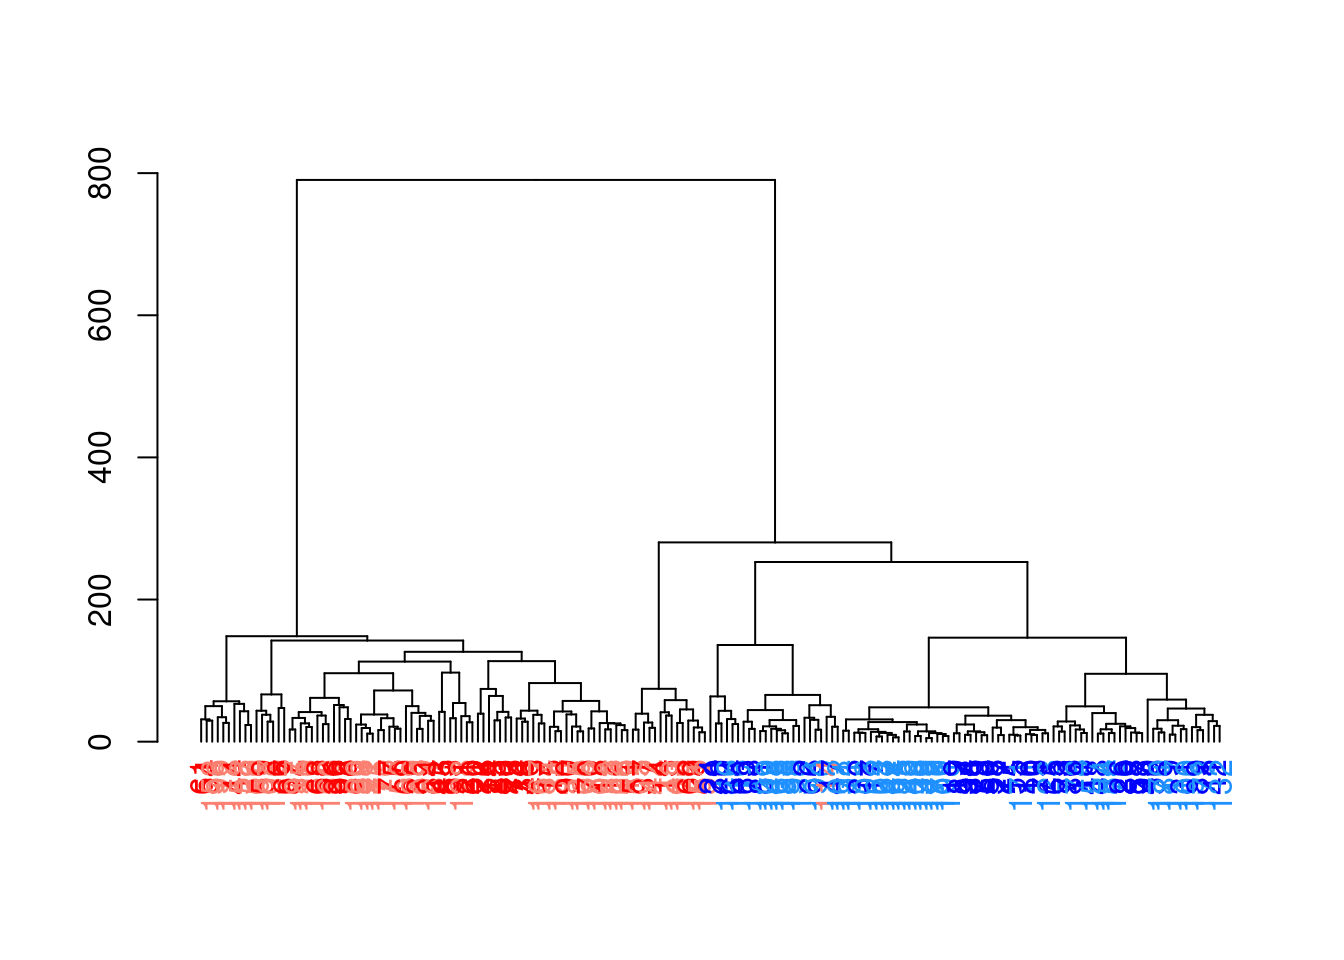 Hierarchy of cells in the 416B data set after hierarchical clustering, where each leaf node is a cell that is coloured according to its oncogene induction status (red is induced, blue is control) and plate of origin (light or dark).